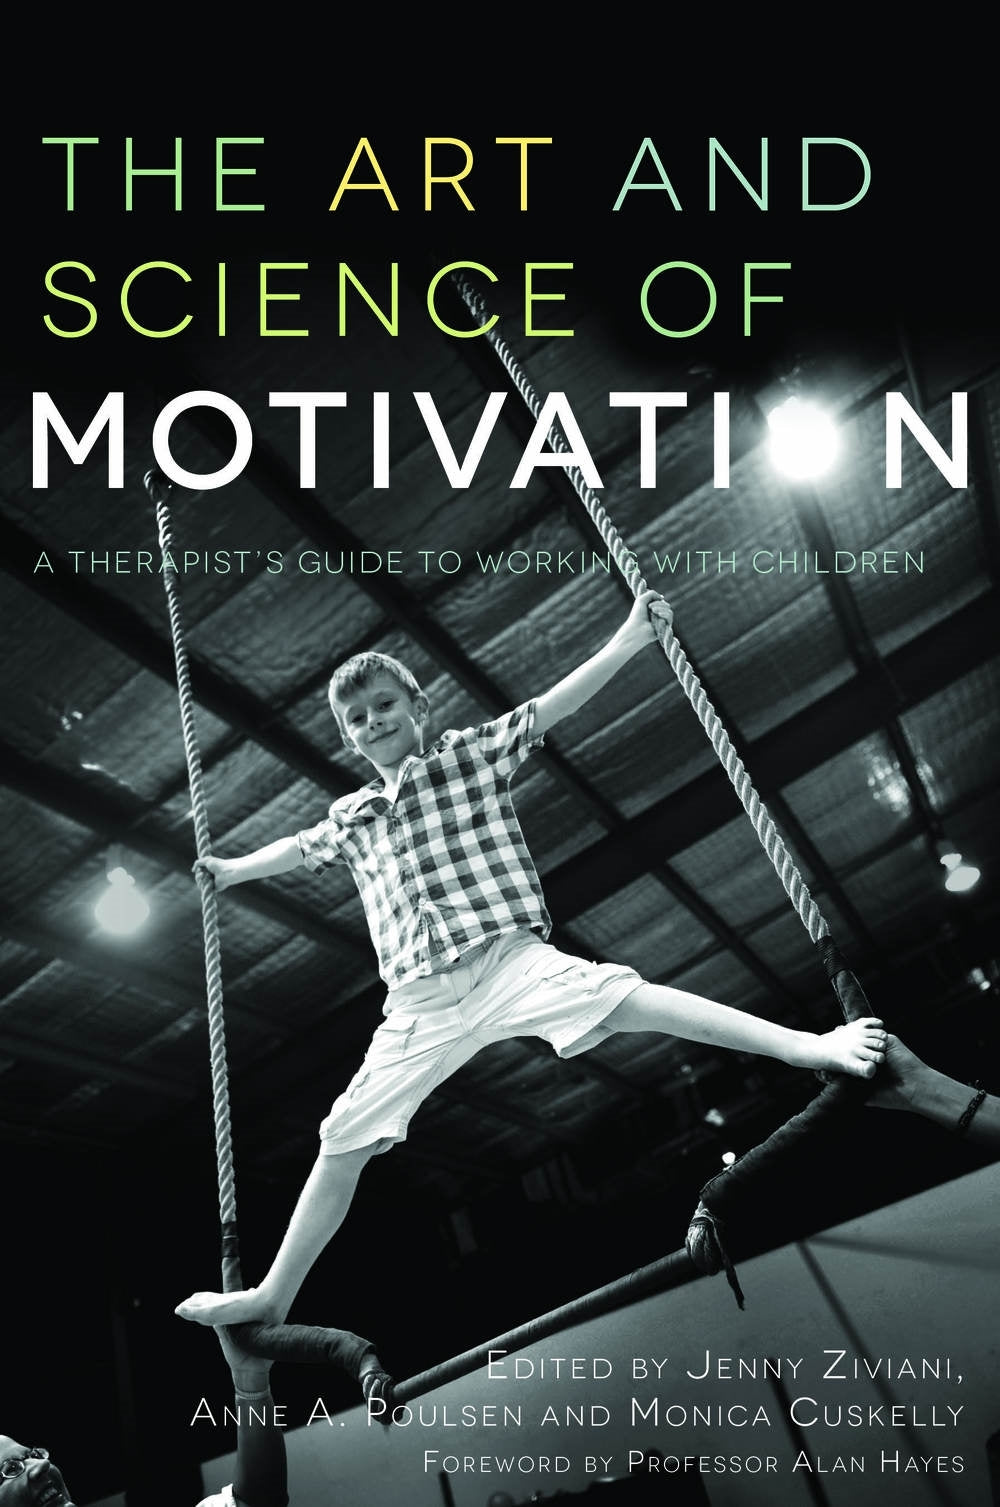 The Art and Science of Motivation by Jenny Ziviani, Anne Poulsen, Monica Cuskelly, No Author Listed